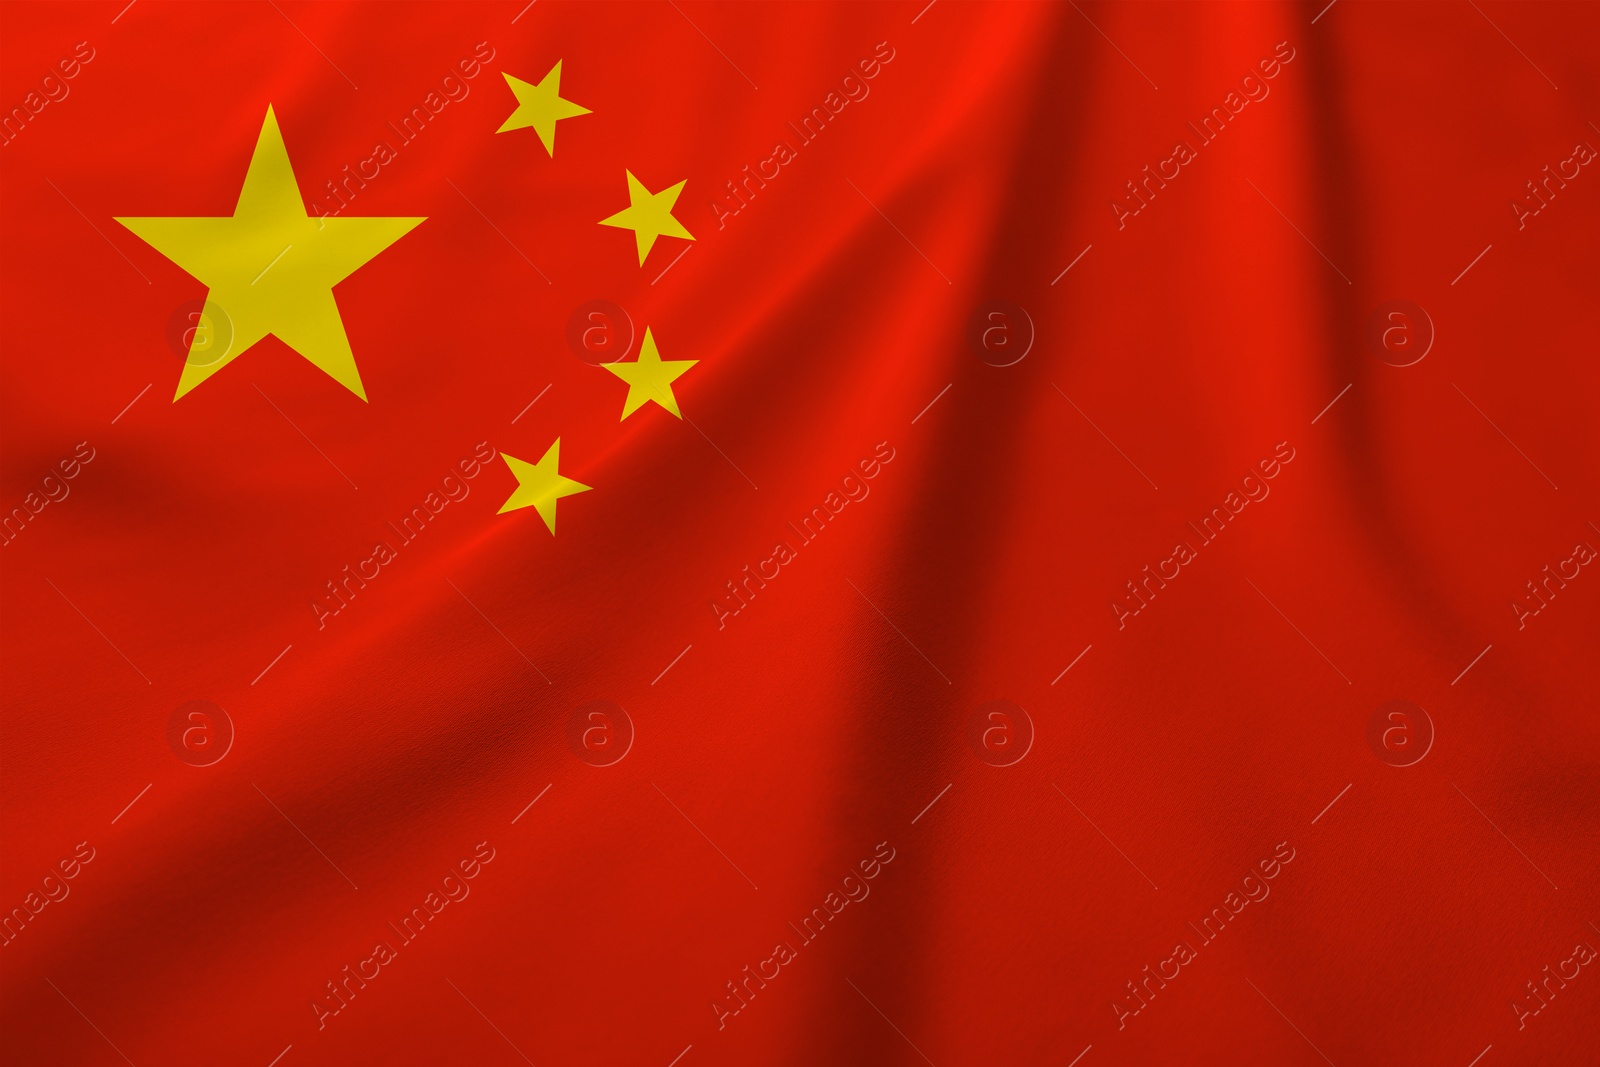 Image of National flag of People's Republic of China